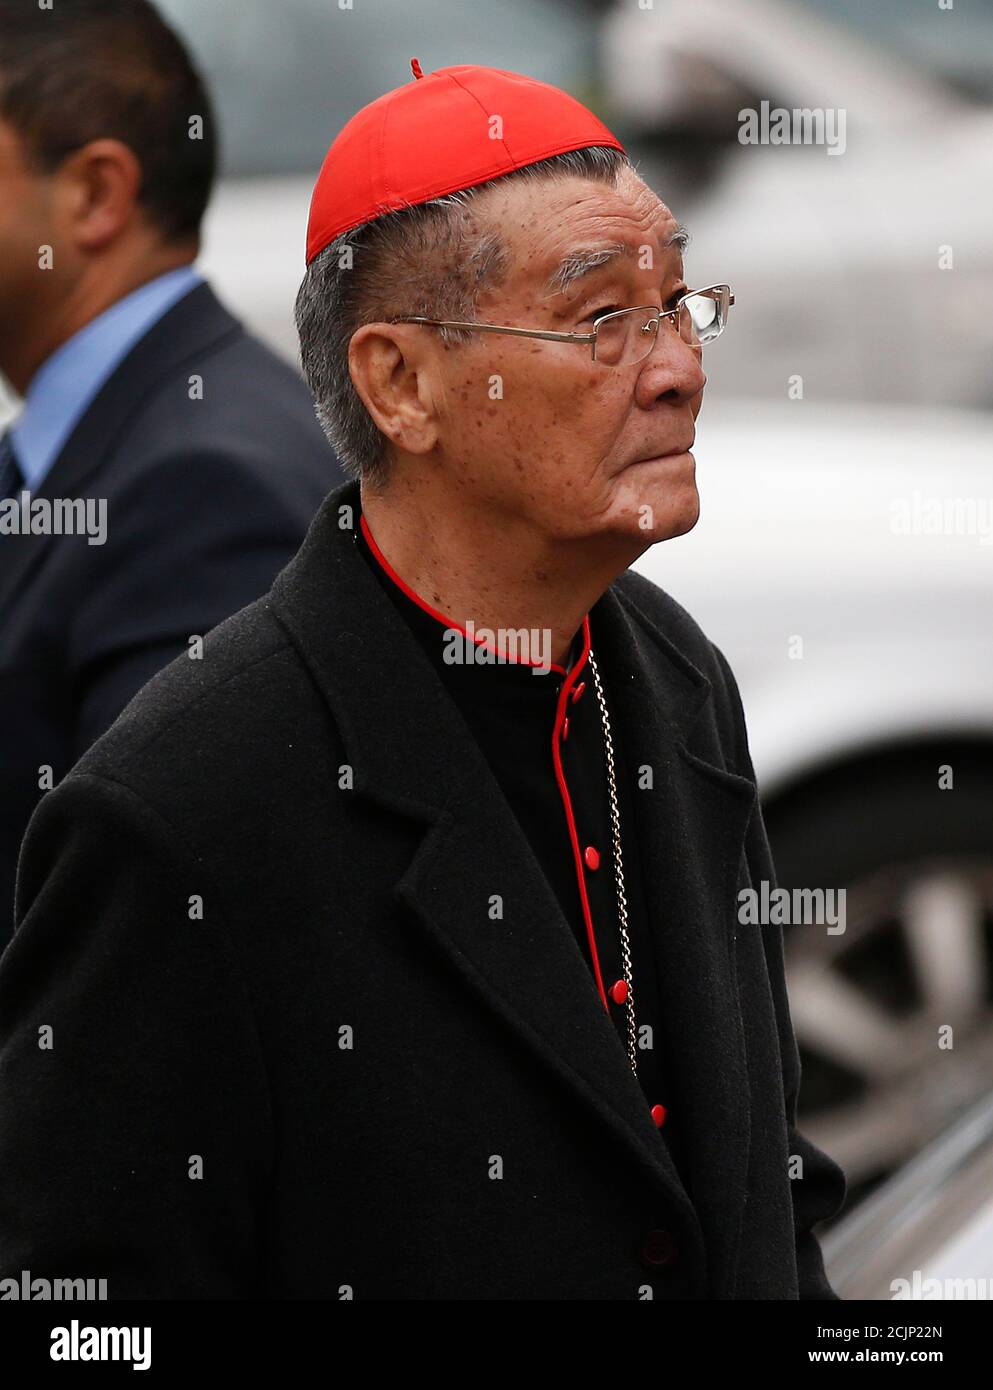 Vietnamese Cardinal Jean-Baptiste Pham Minh Man arrives at a meeting at the  Synod Hall in the Vatican March 7, 2013. Catholic cardinals said on Tuesday  they wanted time to get to know